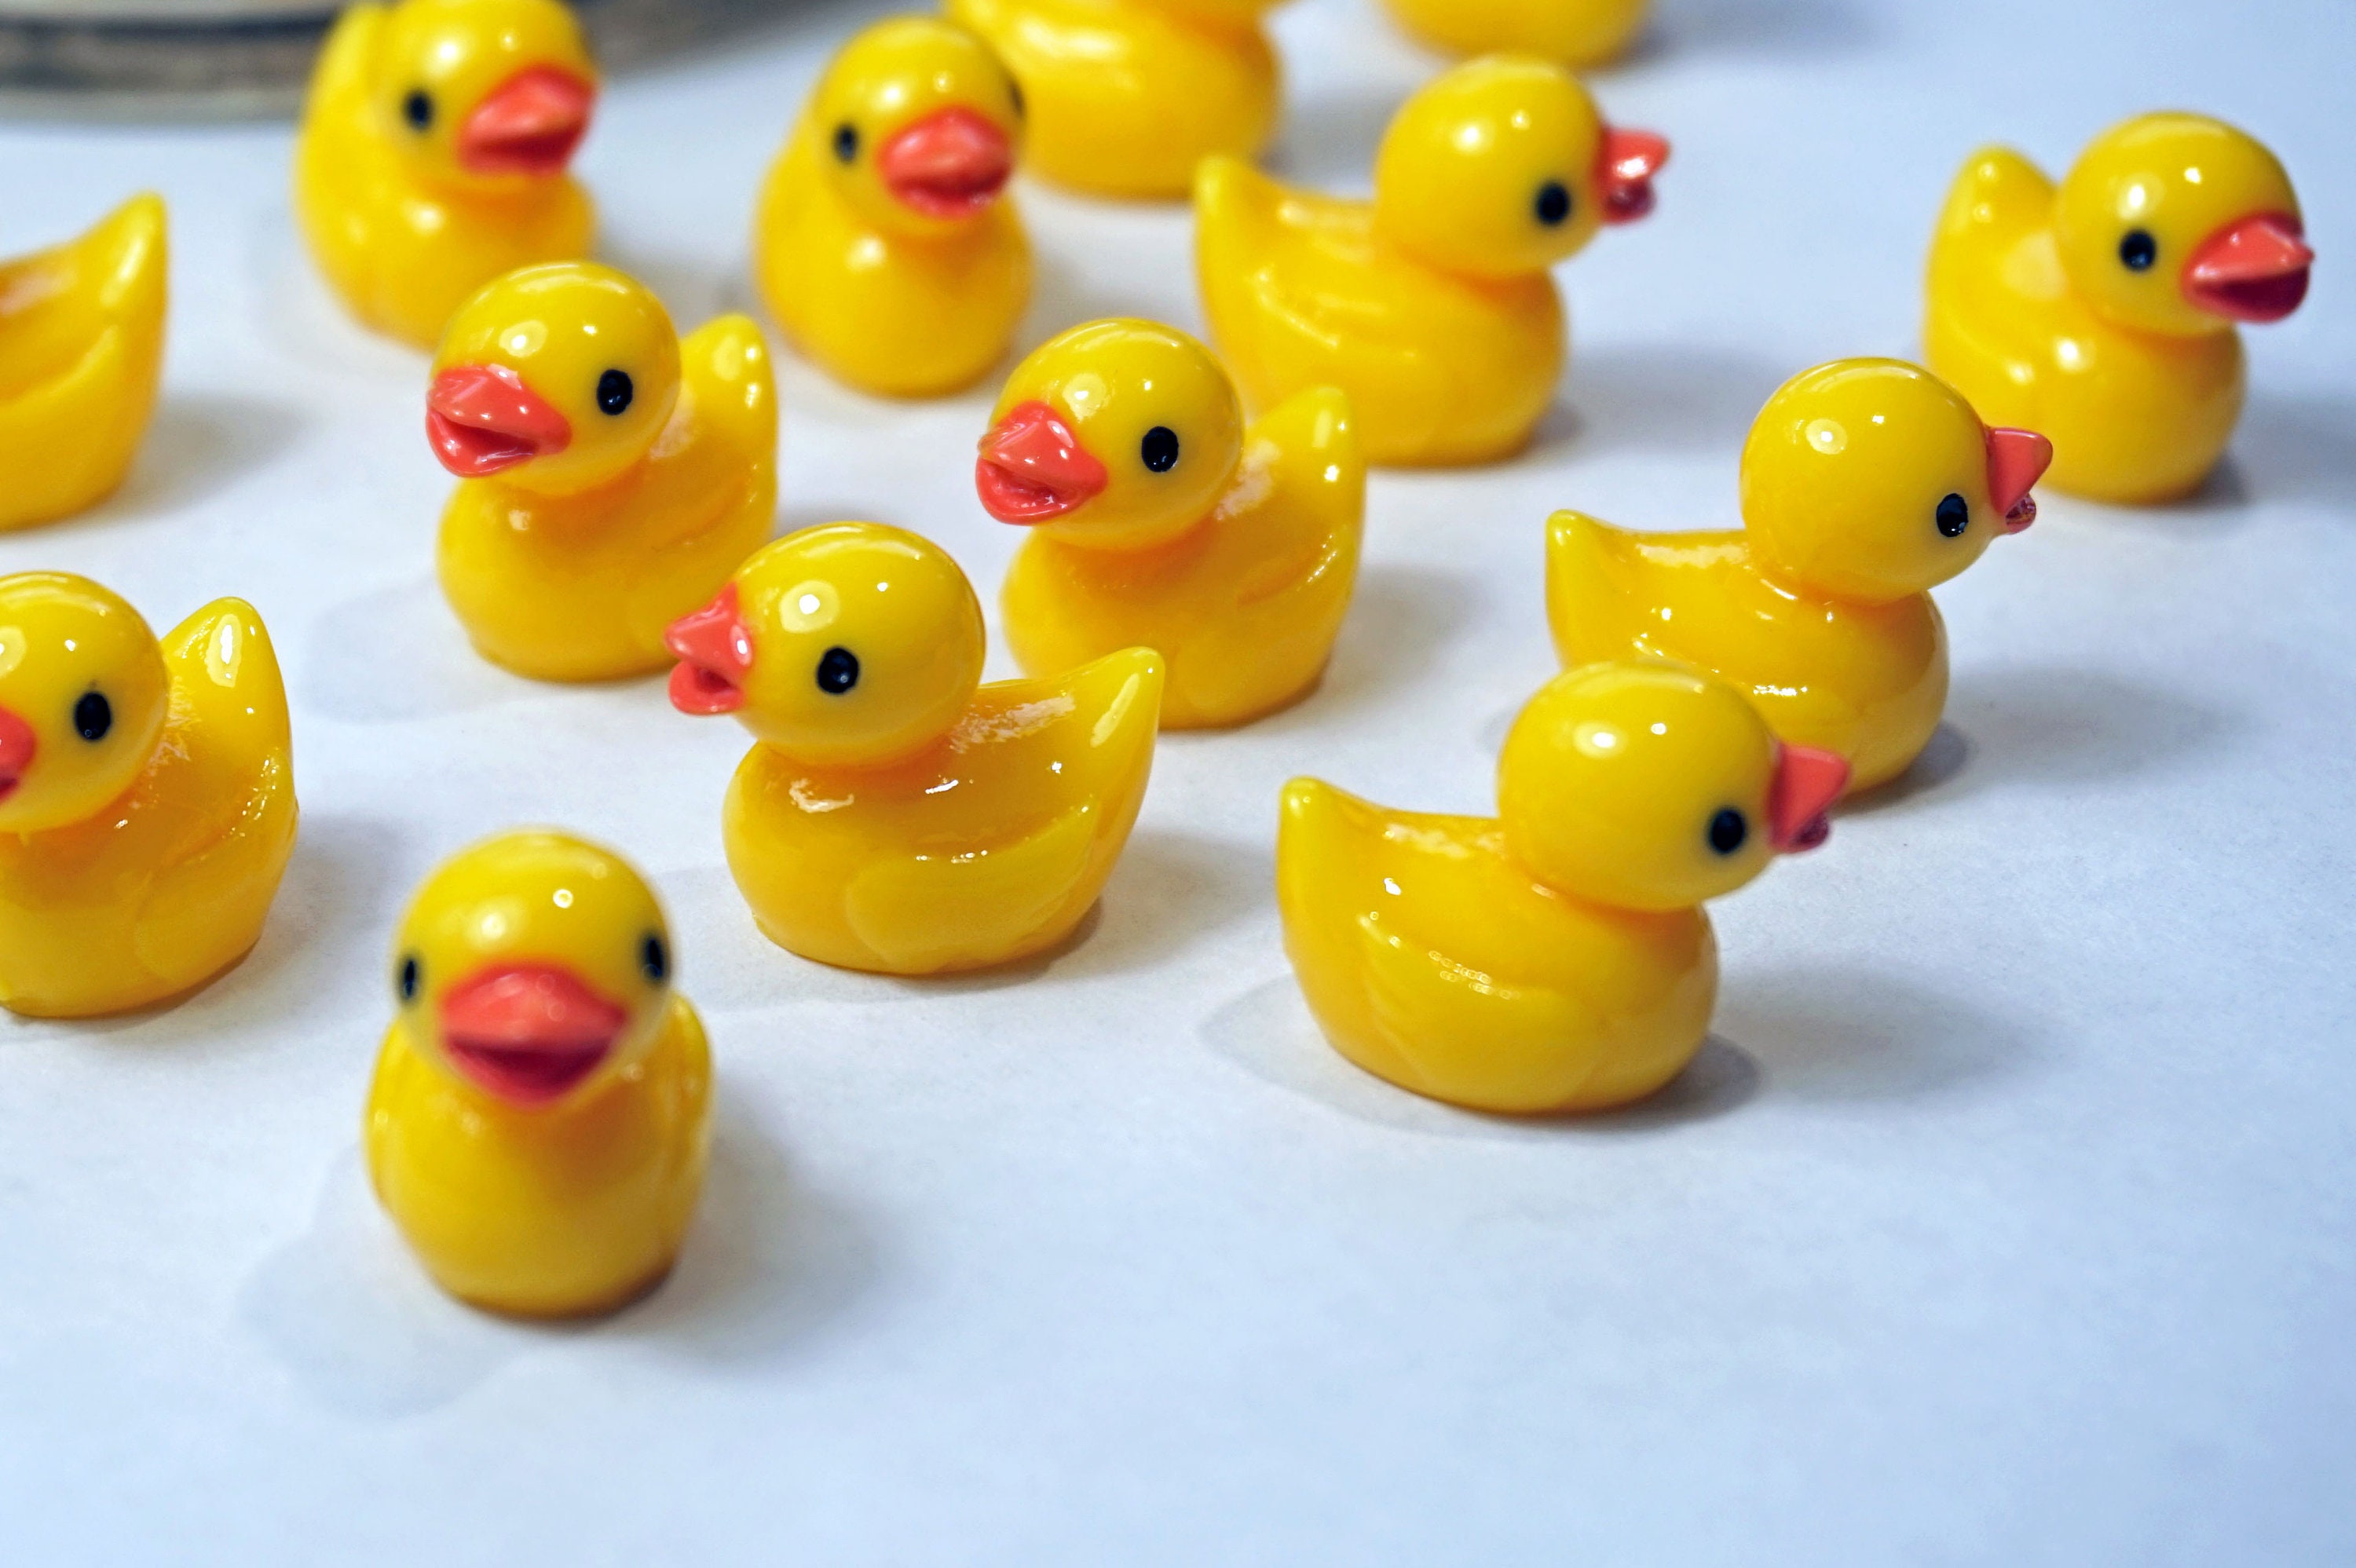 KAWAII MINI DUCKS, Yellow Ducklings Figurines, Small Gift Idea for Kids,  Ready to Gift in Box 